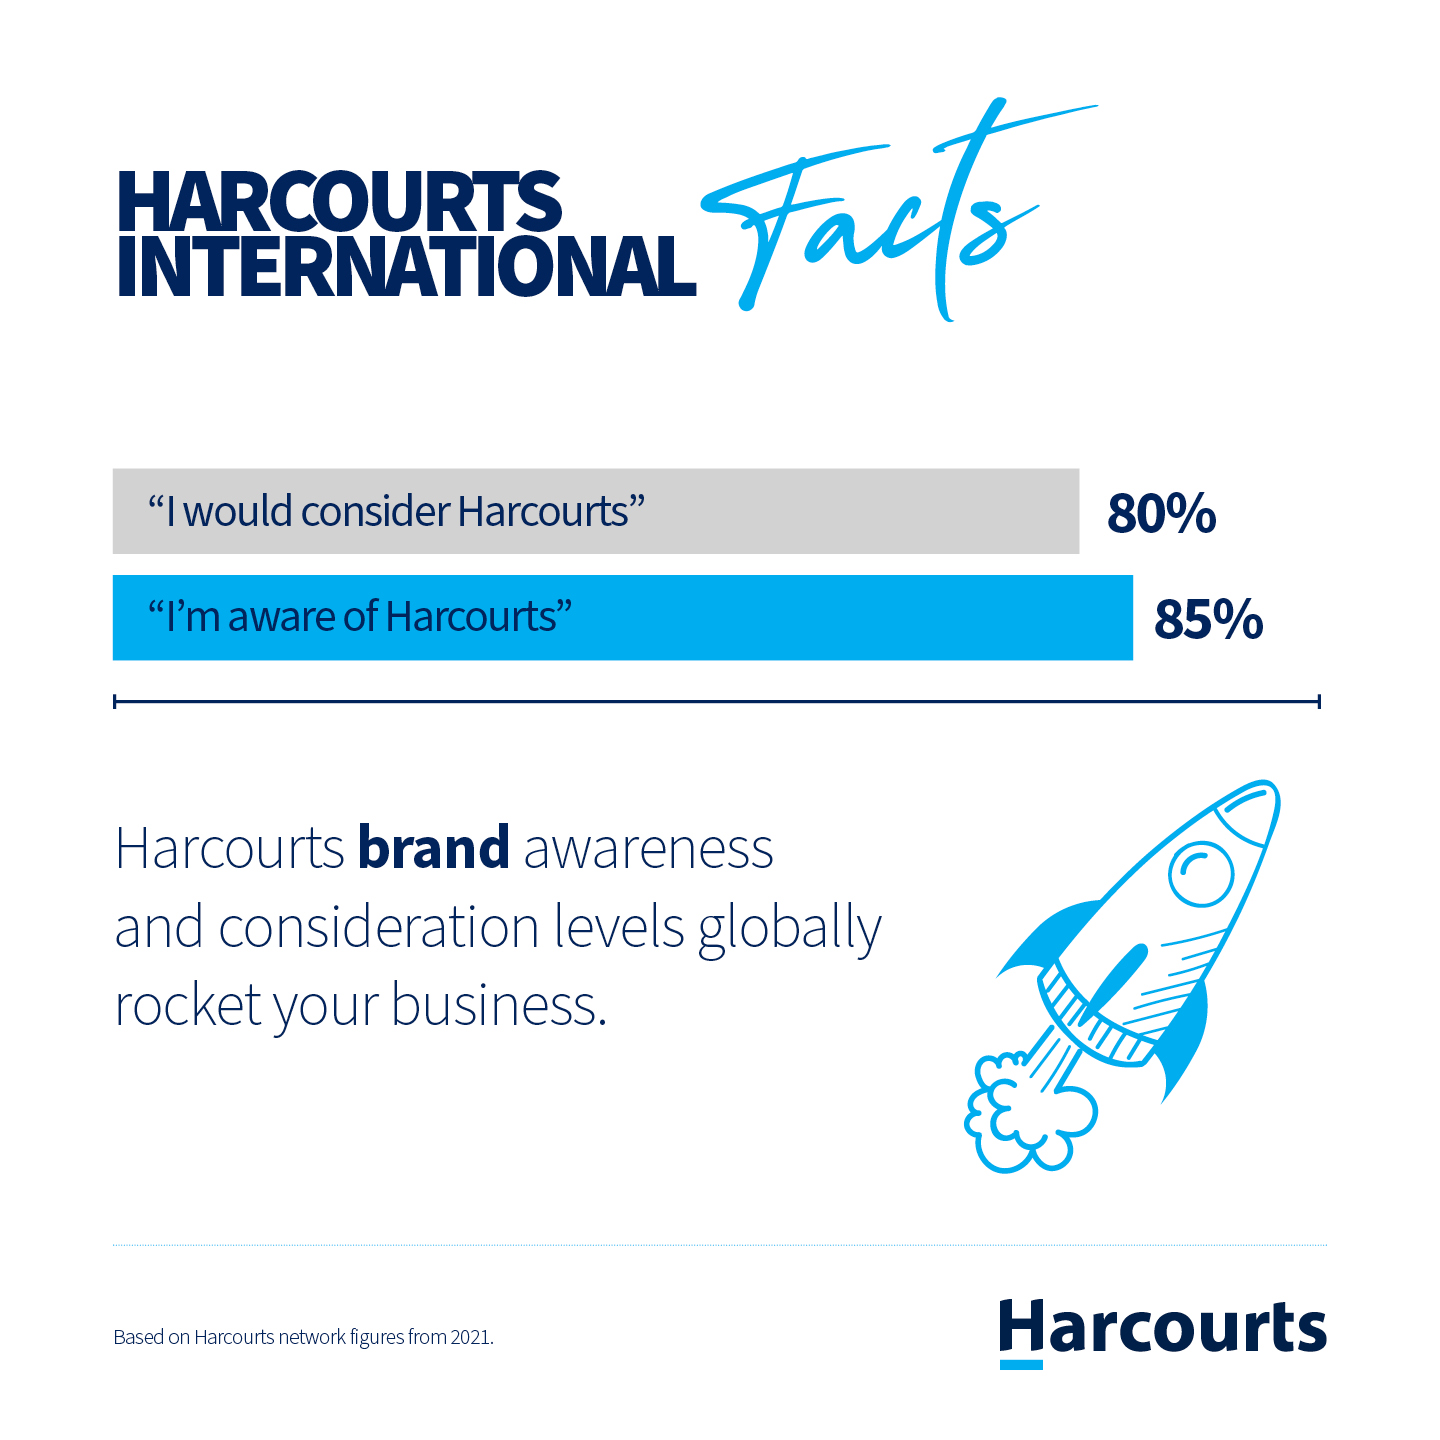 Fact: Harcourts brand awareness and consideration levels globally rocket your business.